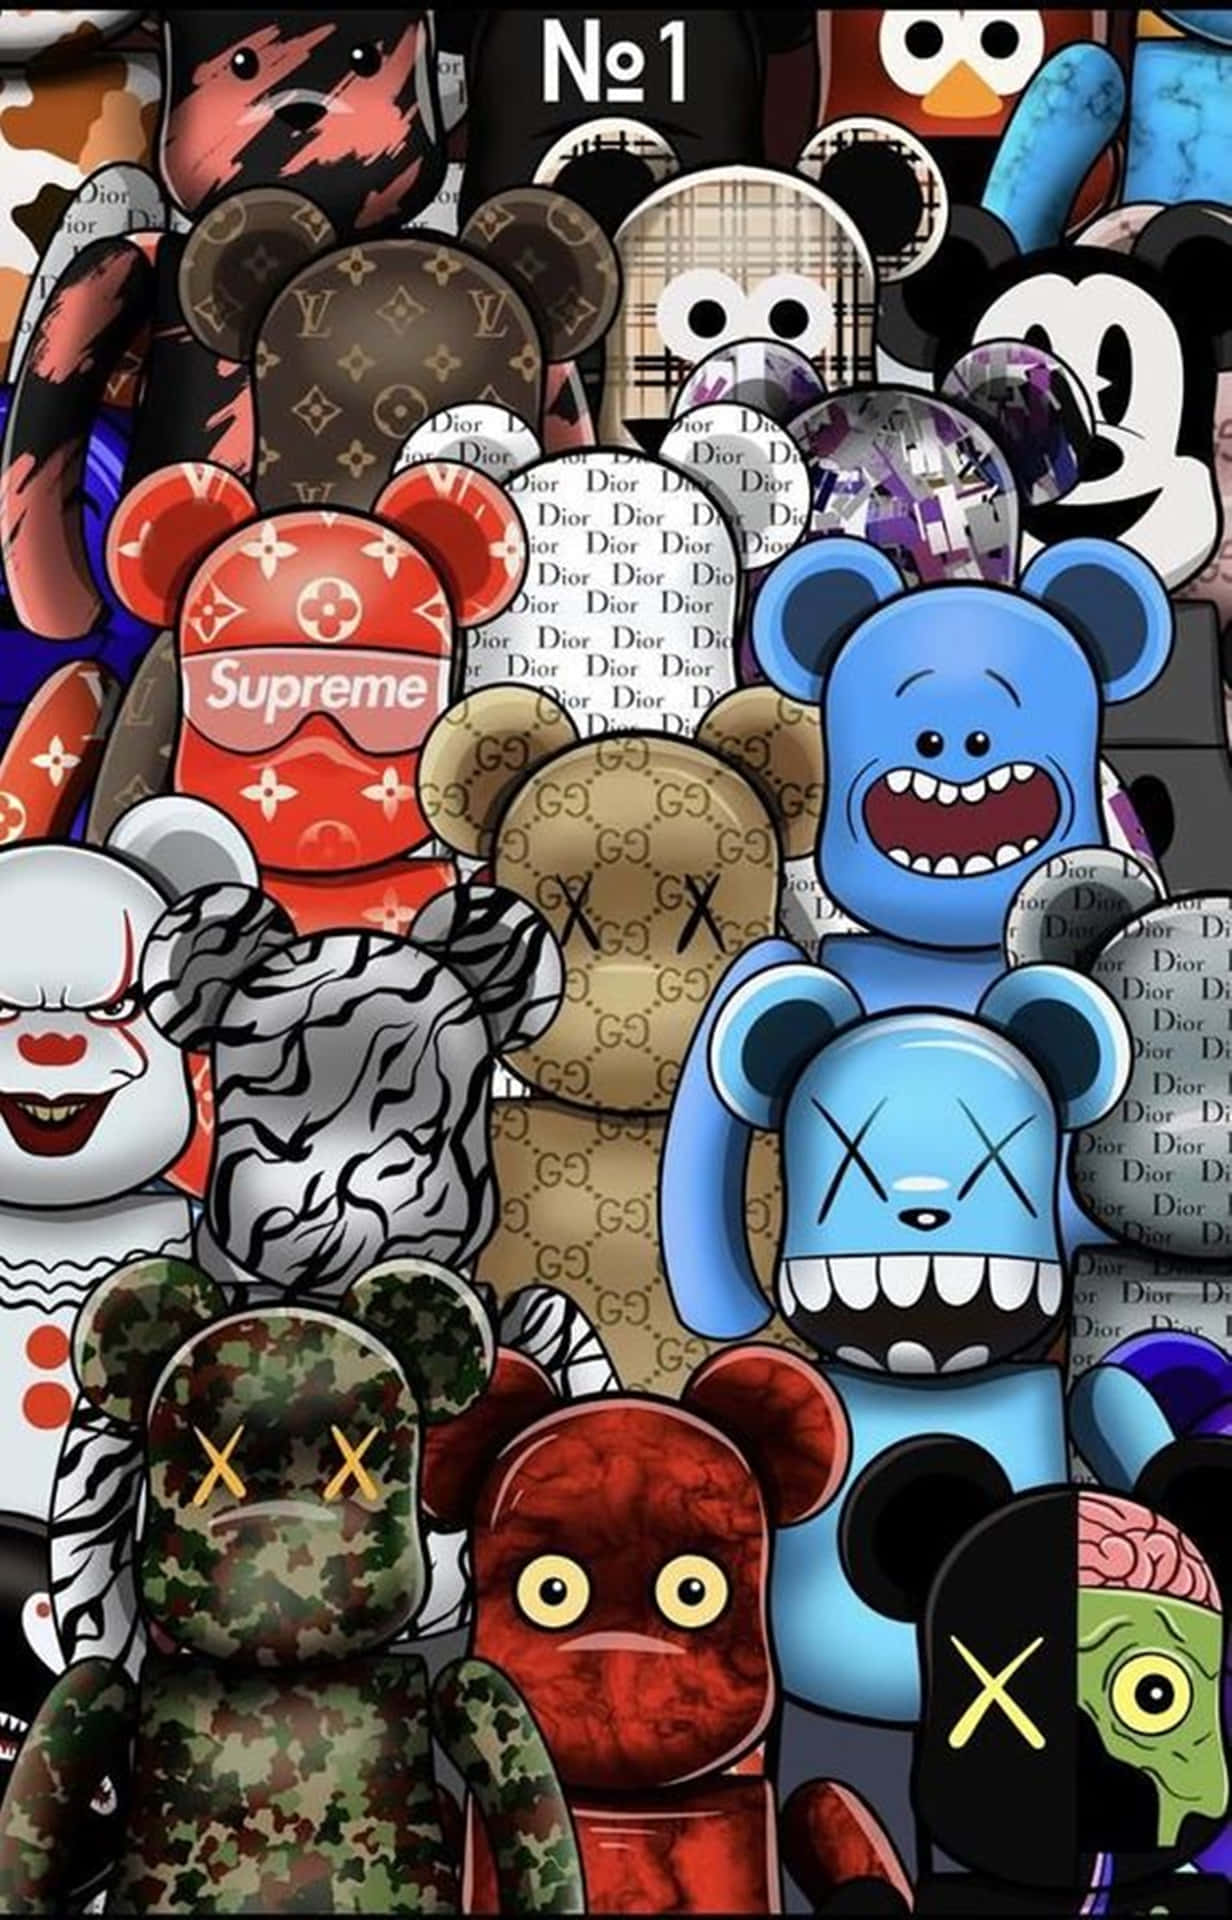 A Group Of Teddy Bears In Different Colors Background